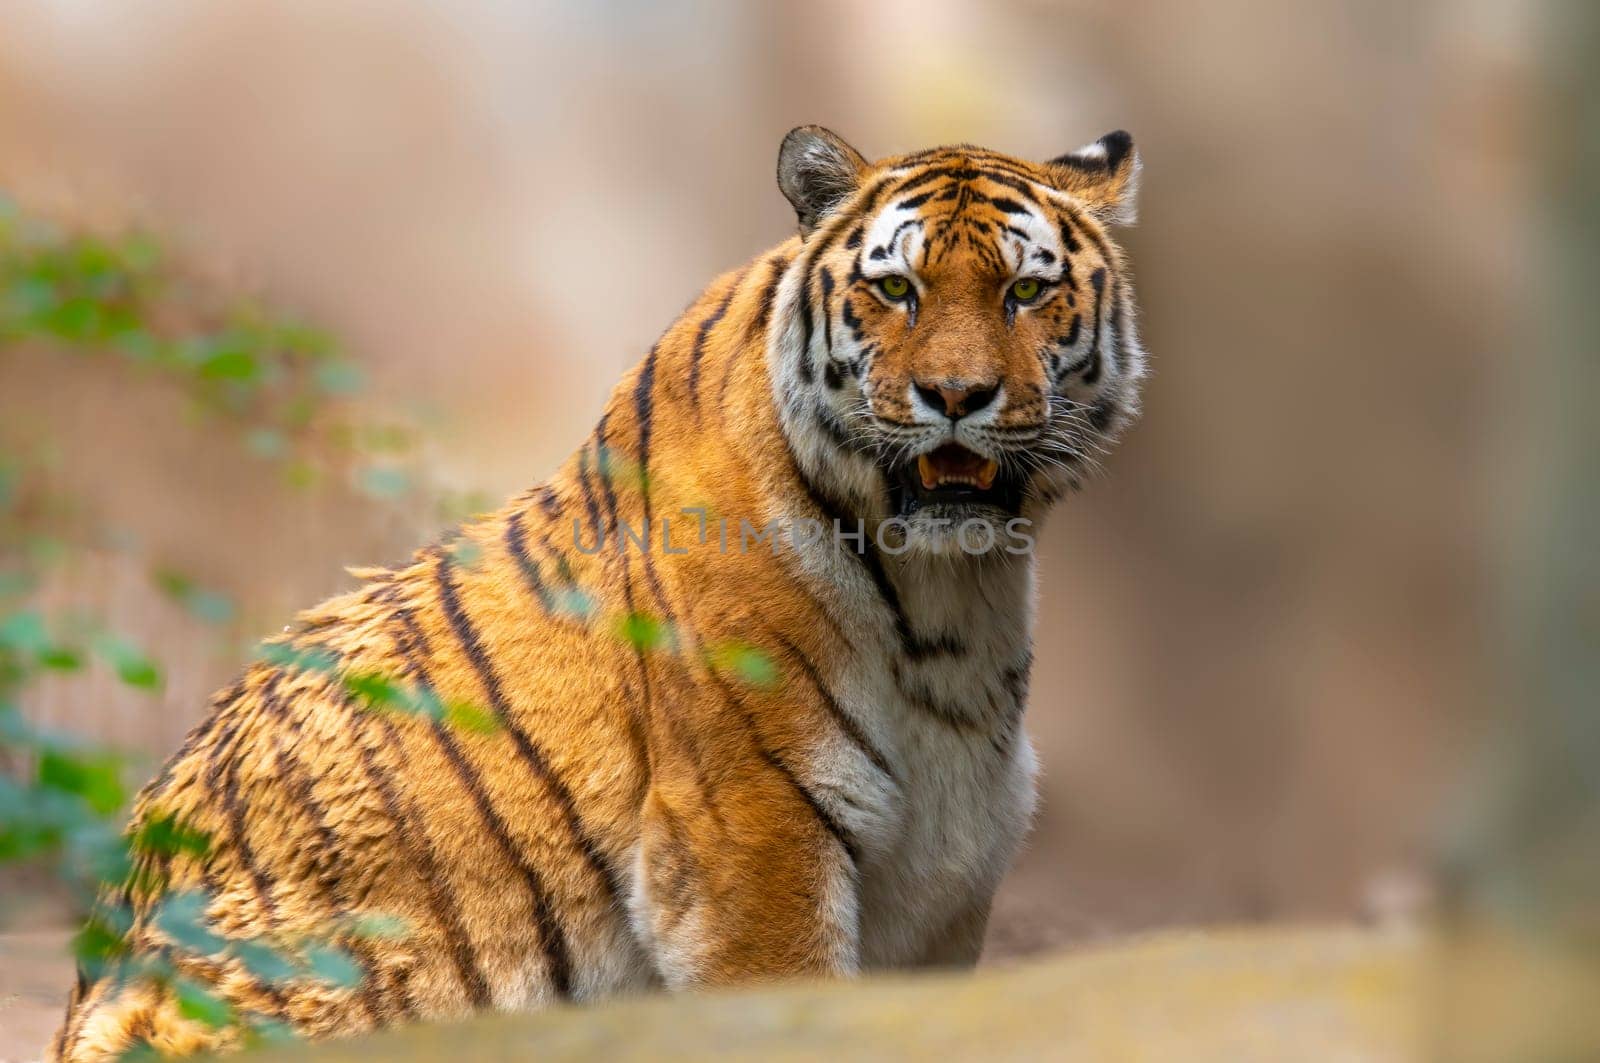 a handsome young tiger looks at the camera leisurely